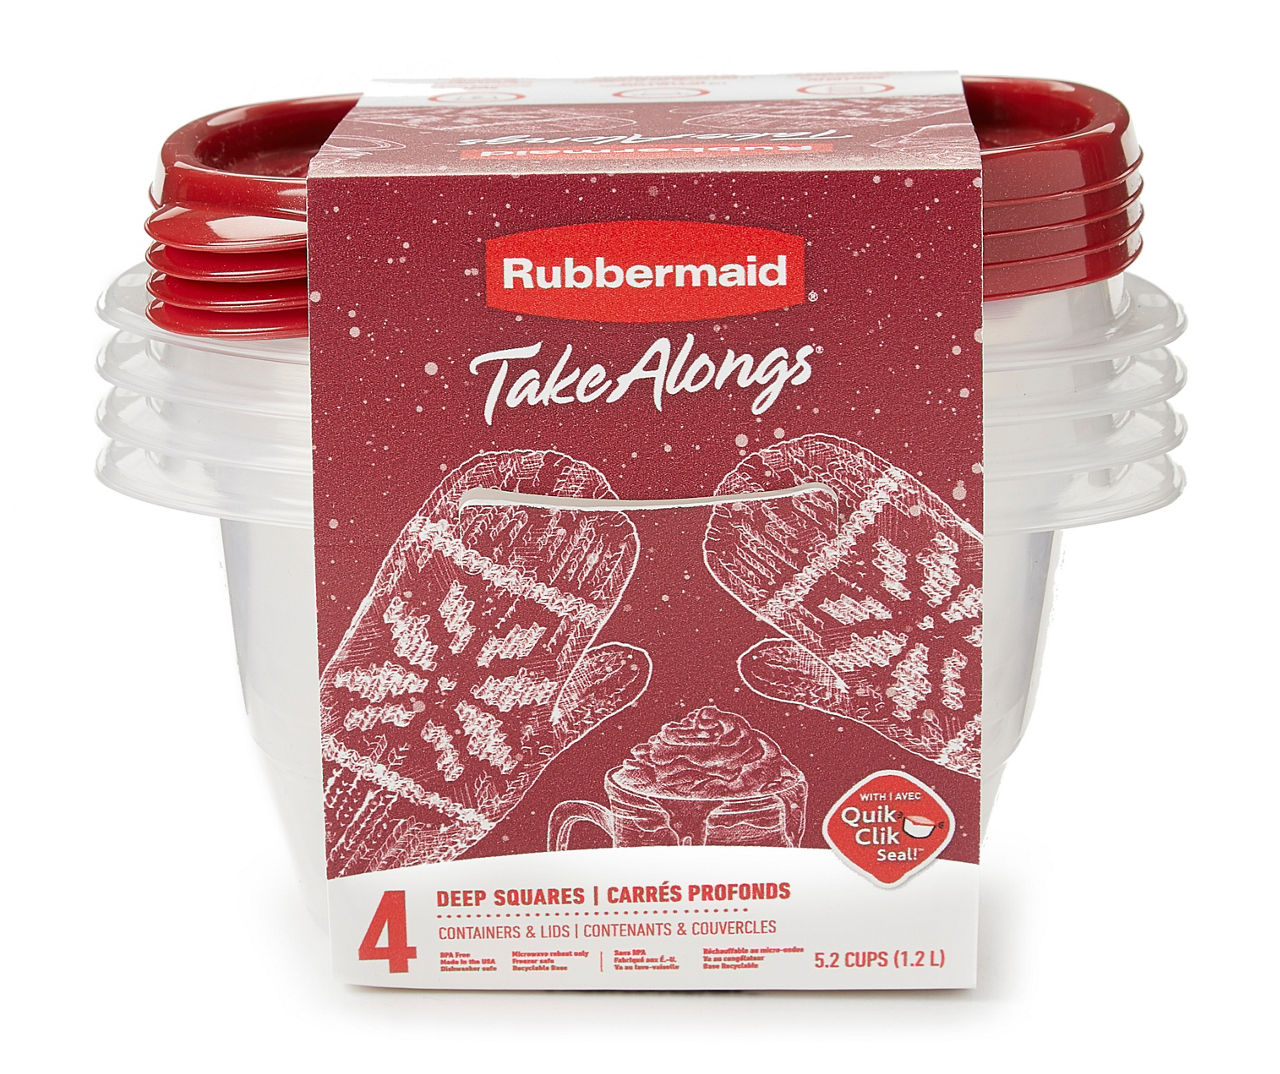 Rubbermaid Takealongs 7 Cup Square Food Storage Container 2 Pk